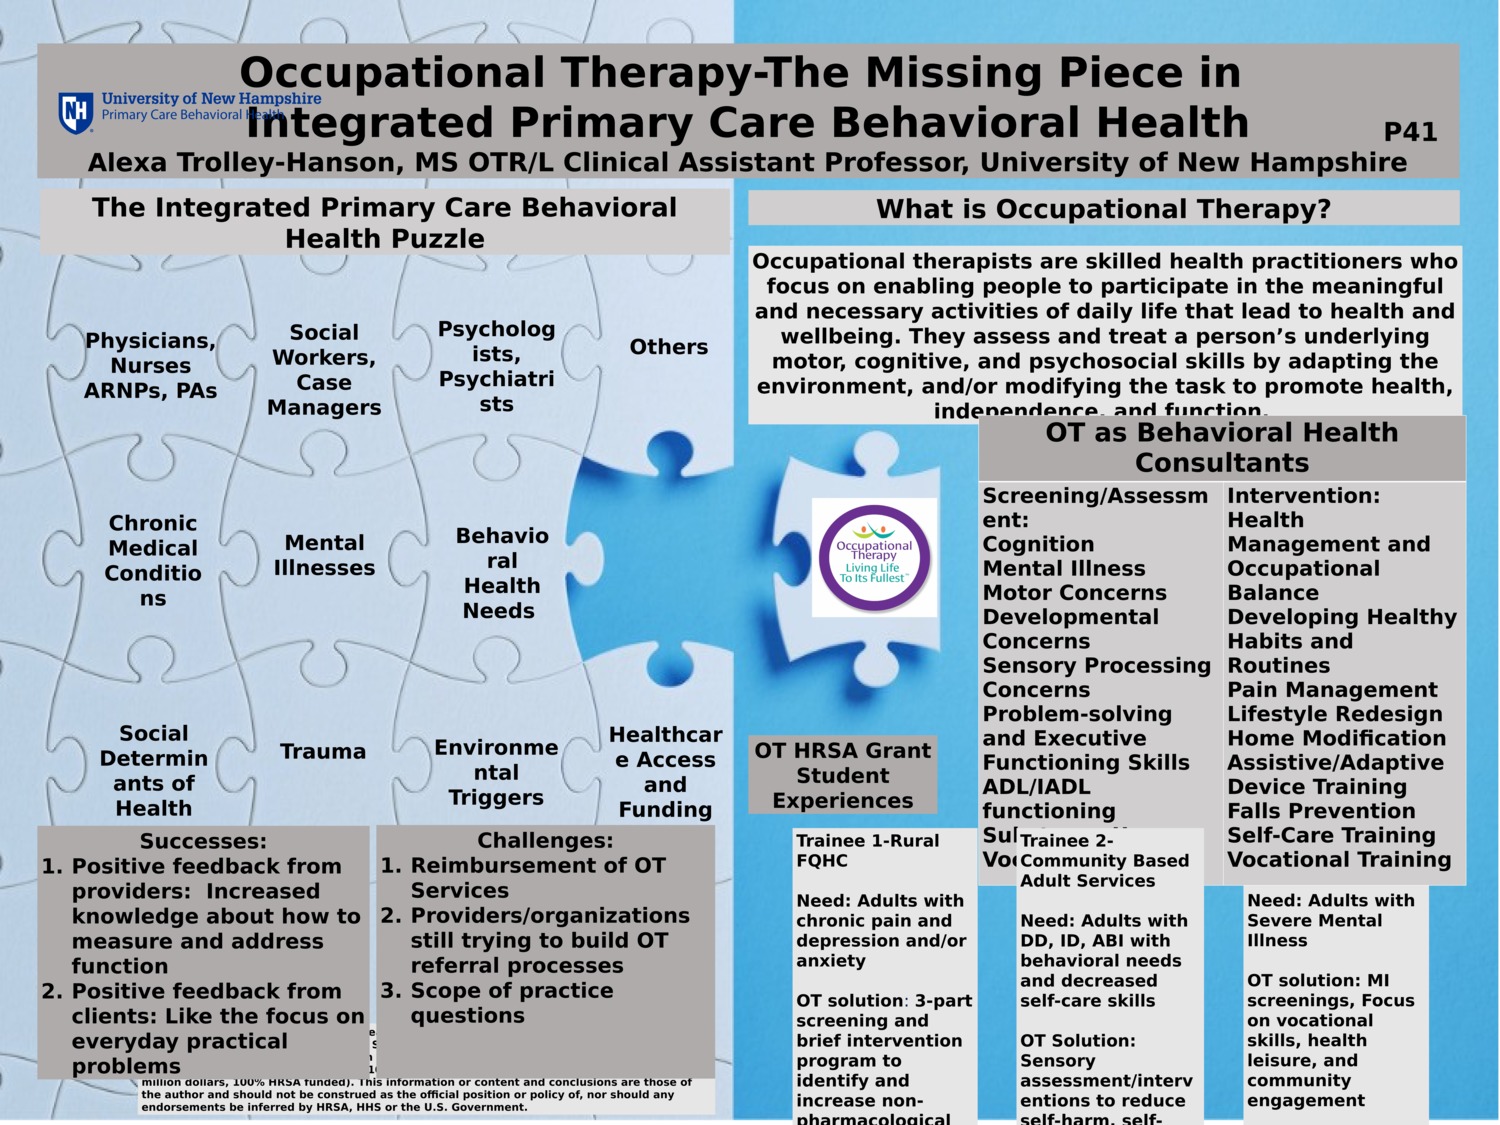 Occupational Therapy-The Missing Piece In Integrated Primary Care Behavioral Health by atrolley